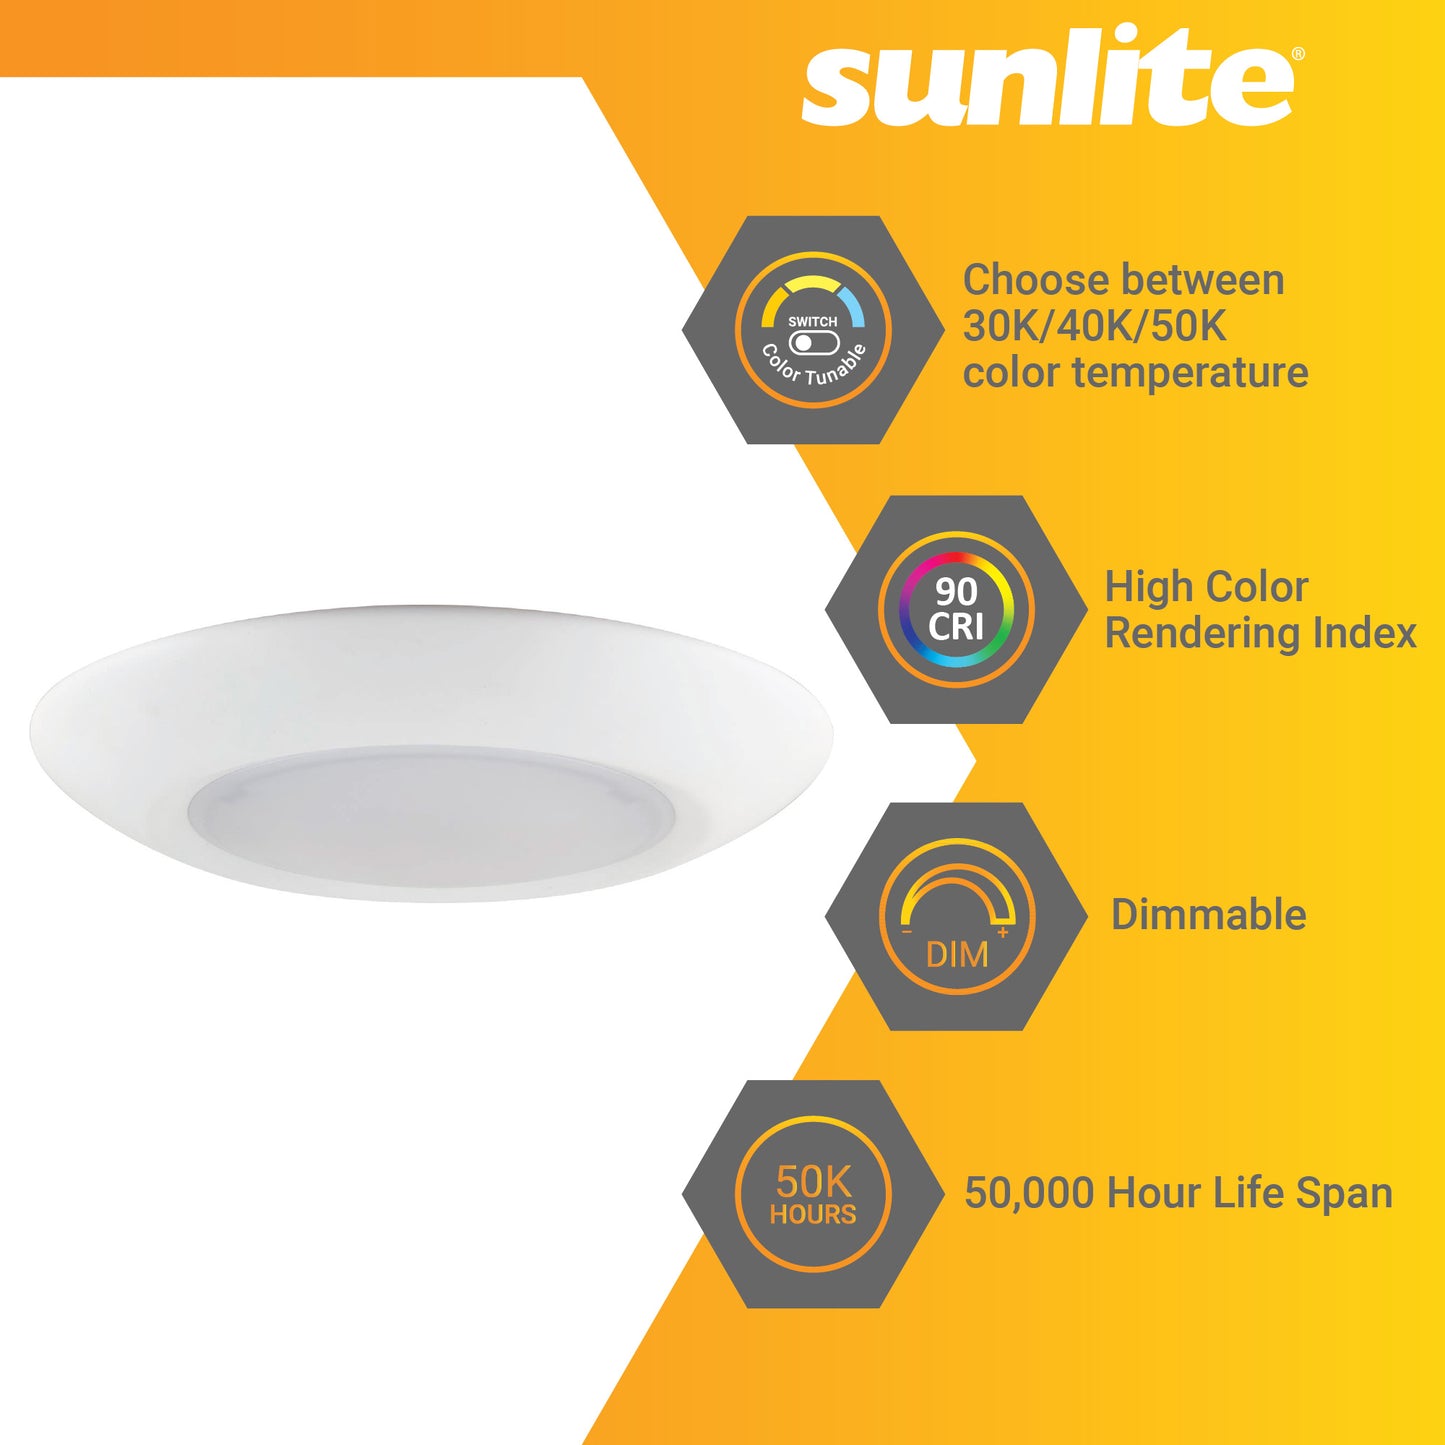 Sunlite 6-Inch Round LED Mini Flat Panel Fixture, 15 Watts (60W Equivalent), 120 Volts, Color Tunable (30K/40K/50K), 800 Lumens, Dimmable, 50,000 Hour Life Span, ETL Listed, White Finish